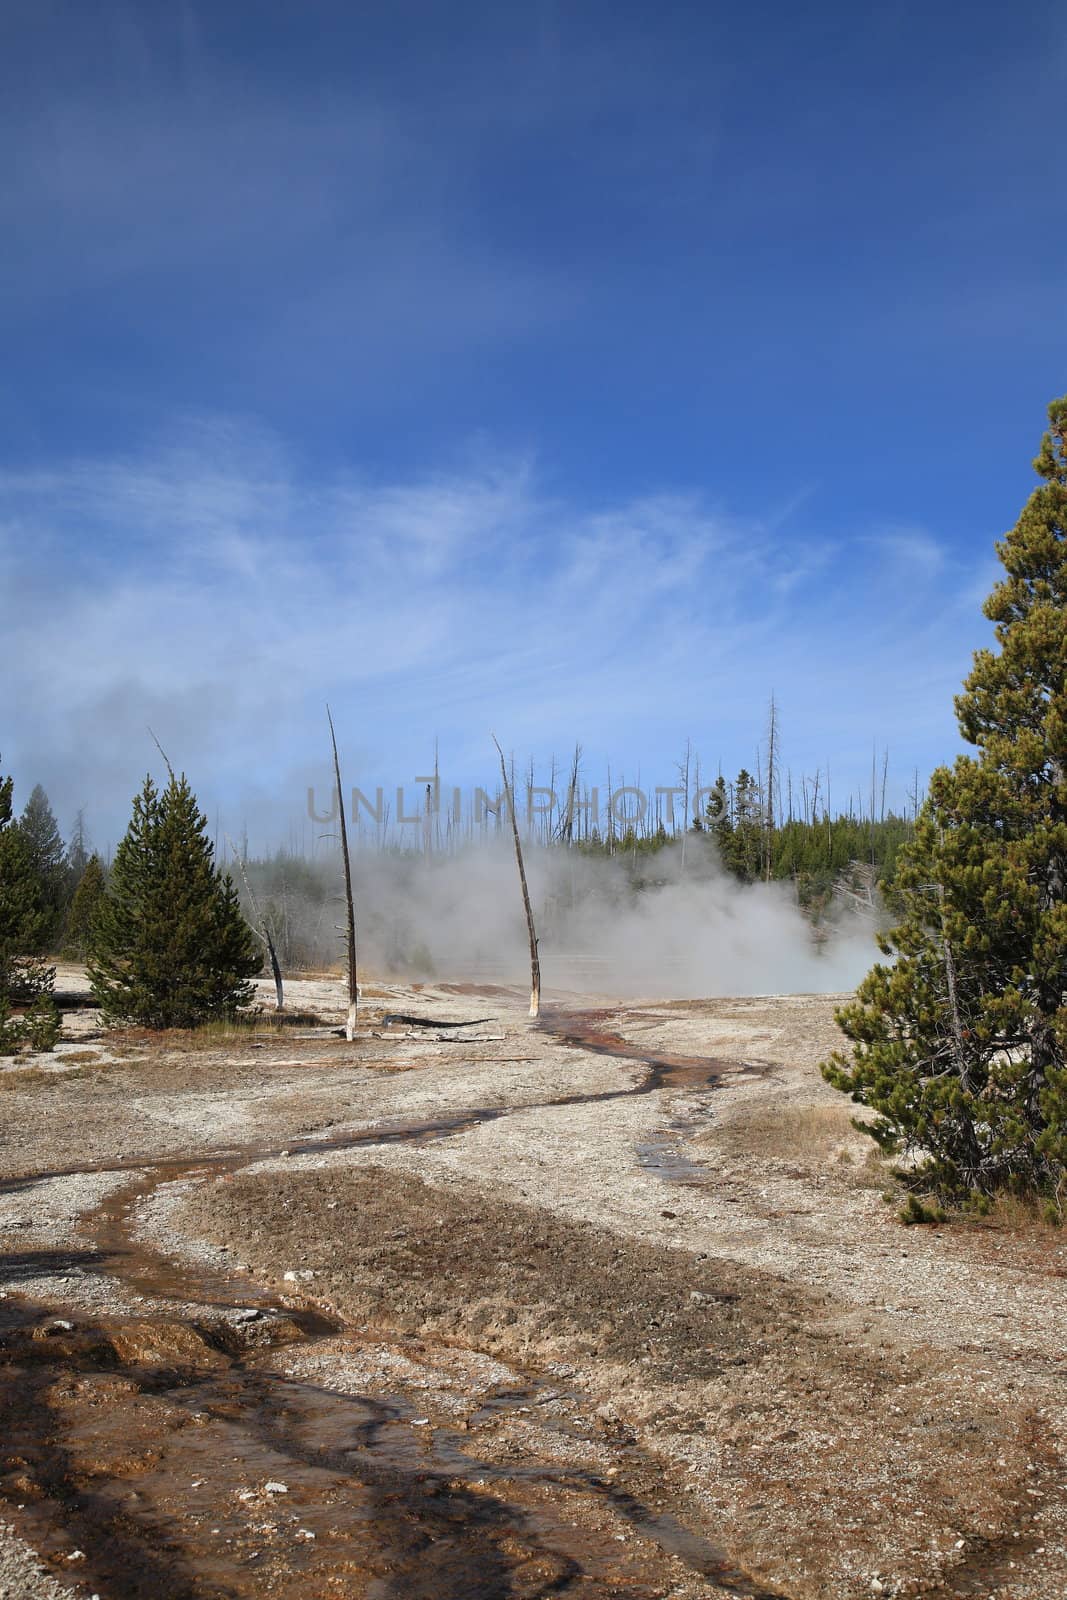 Sloping landscape near Yellowstone Lake, in the West Thumb Geyser Basin.